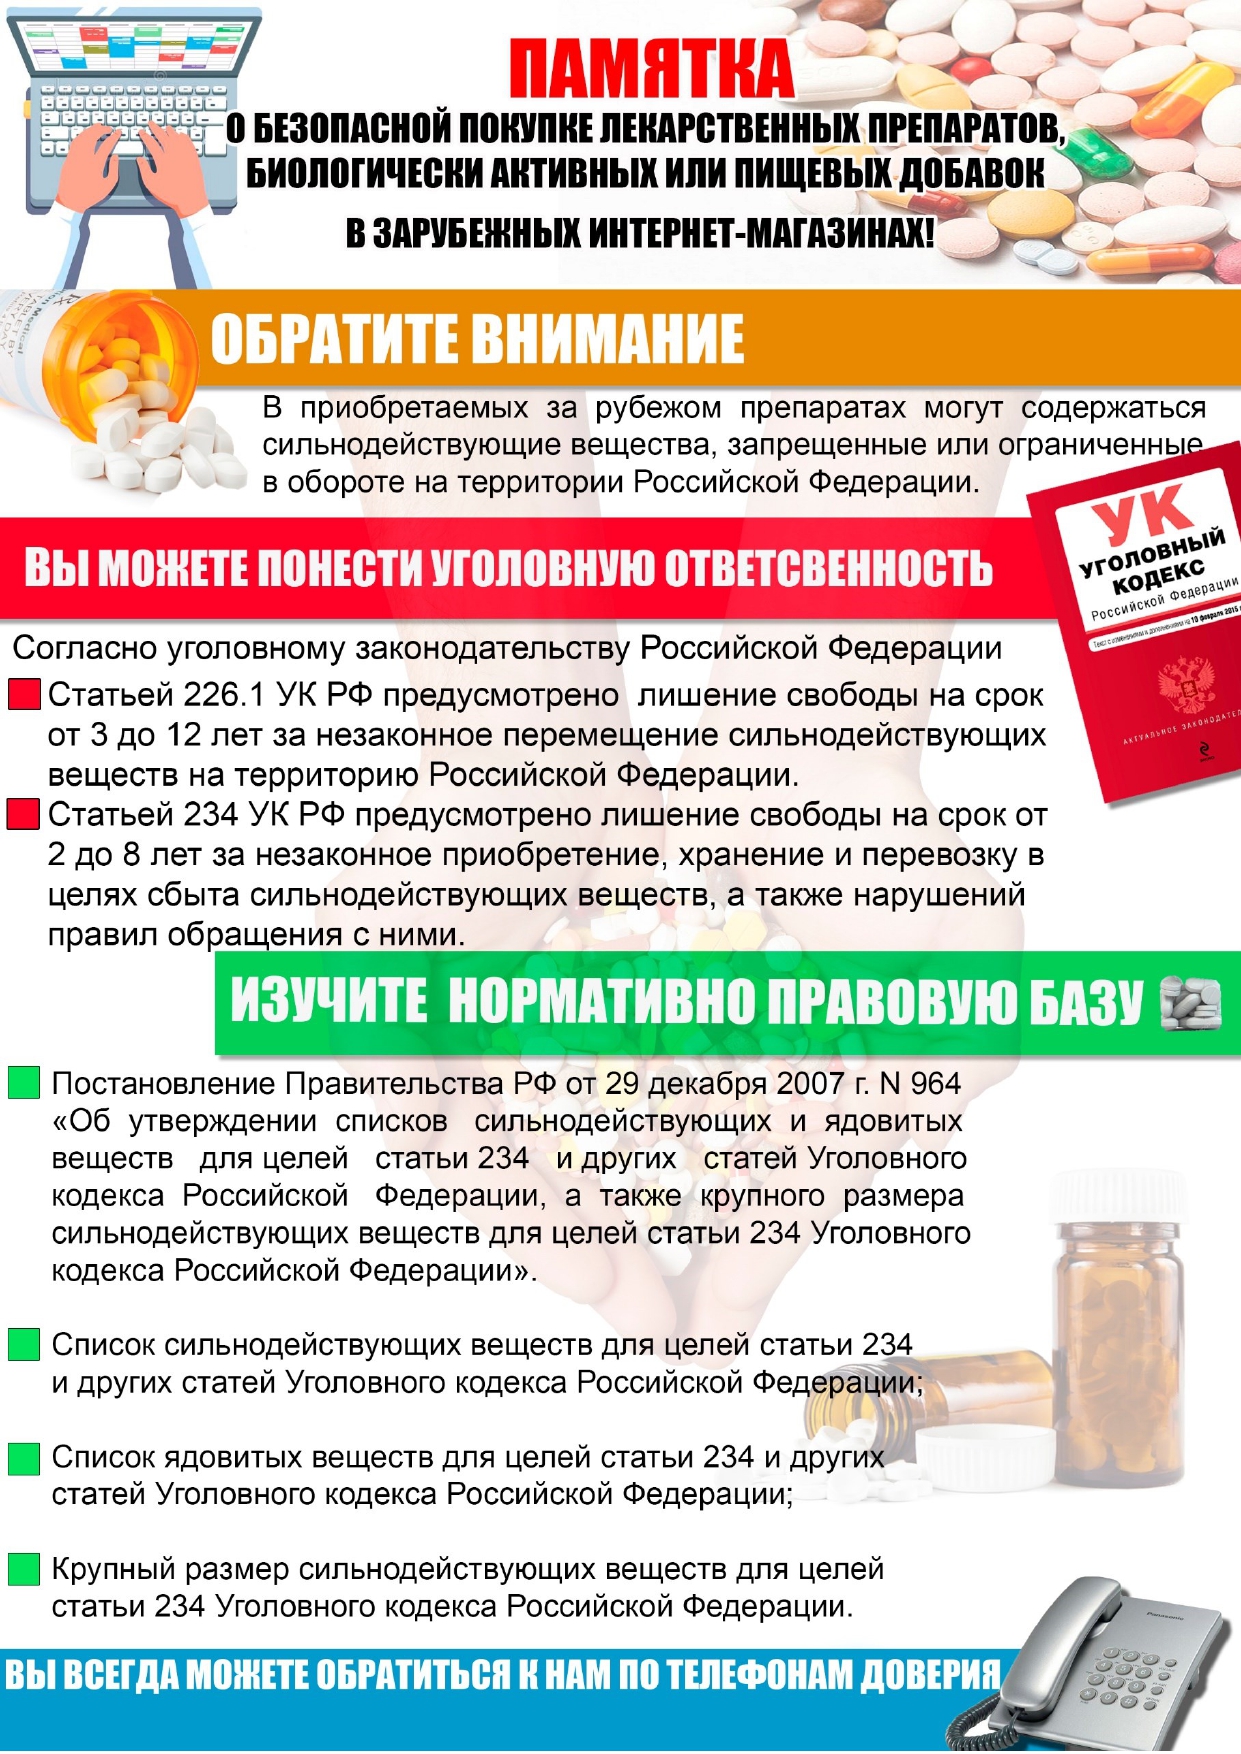 Памятка pages to jpg 0001